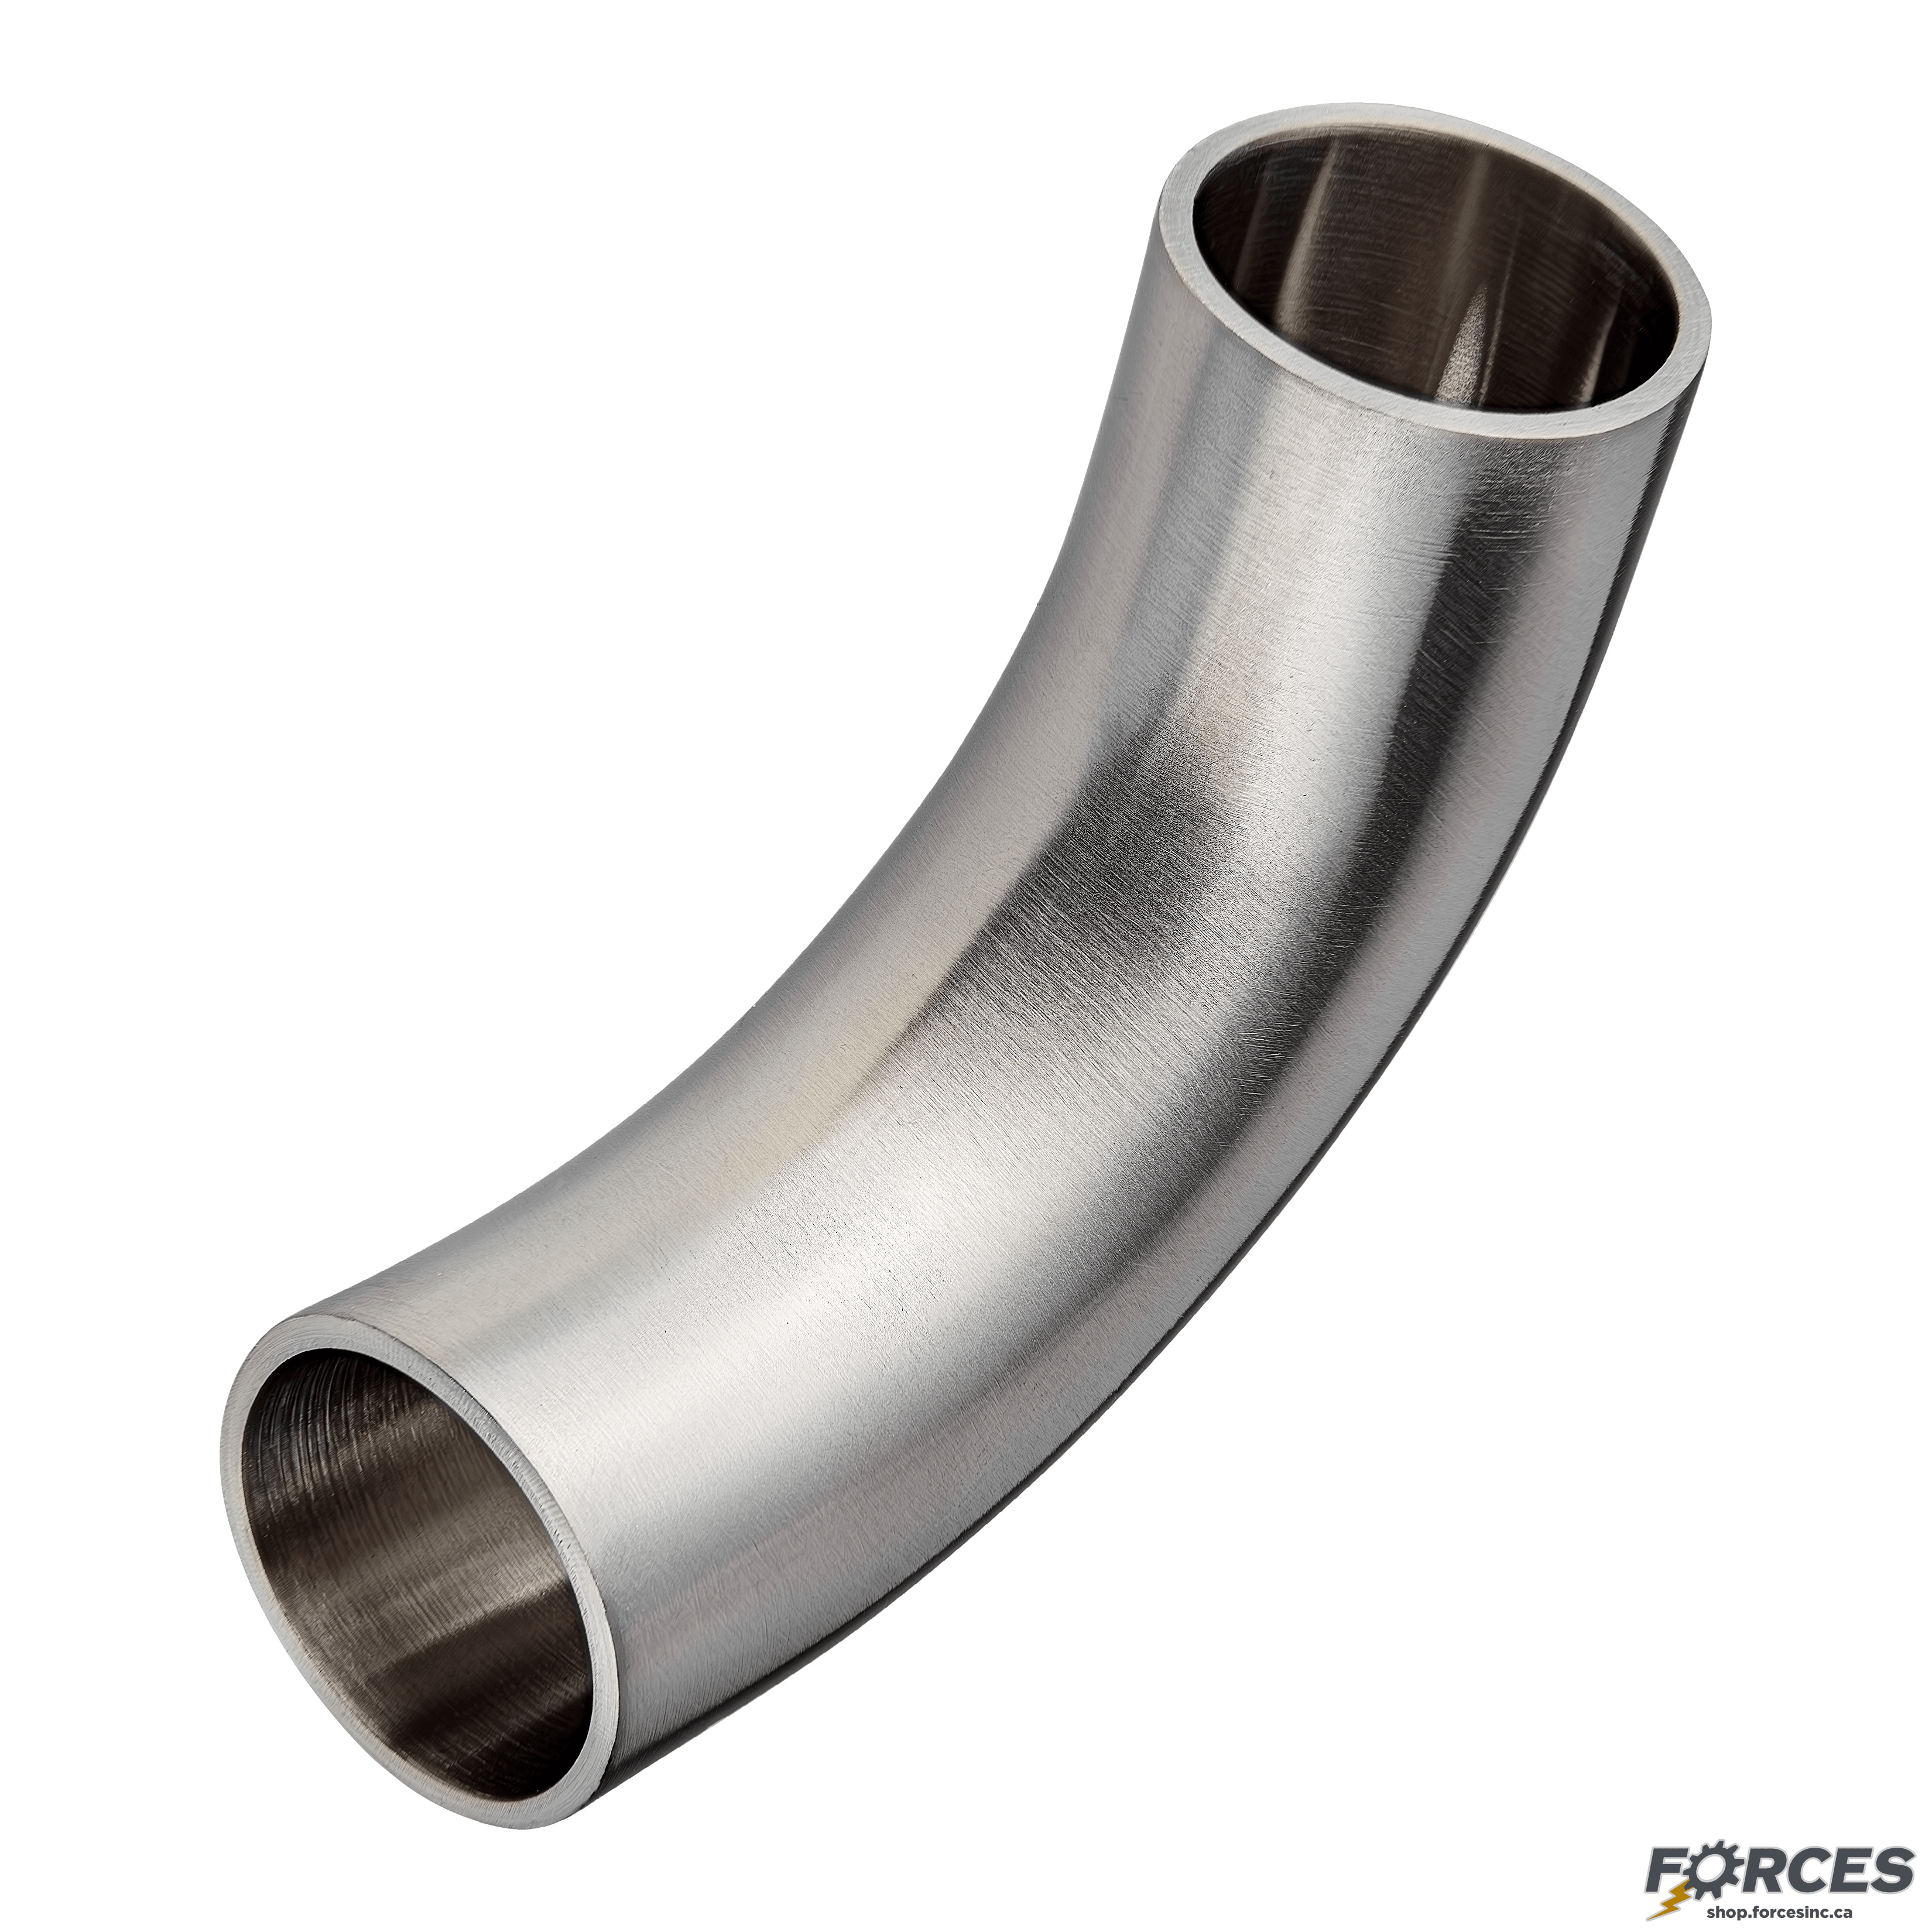 1" Butt Weld 90° Elbow Long Tangent - Stainless Steel 304 - Forces Inc